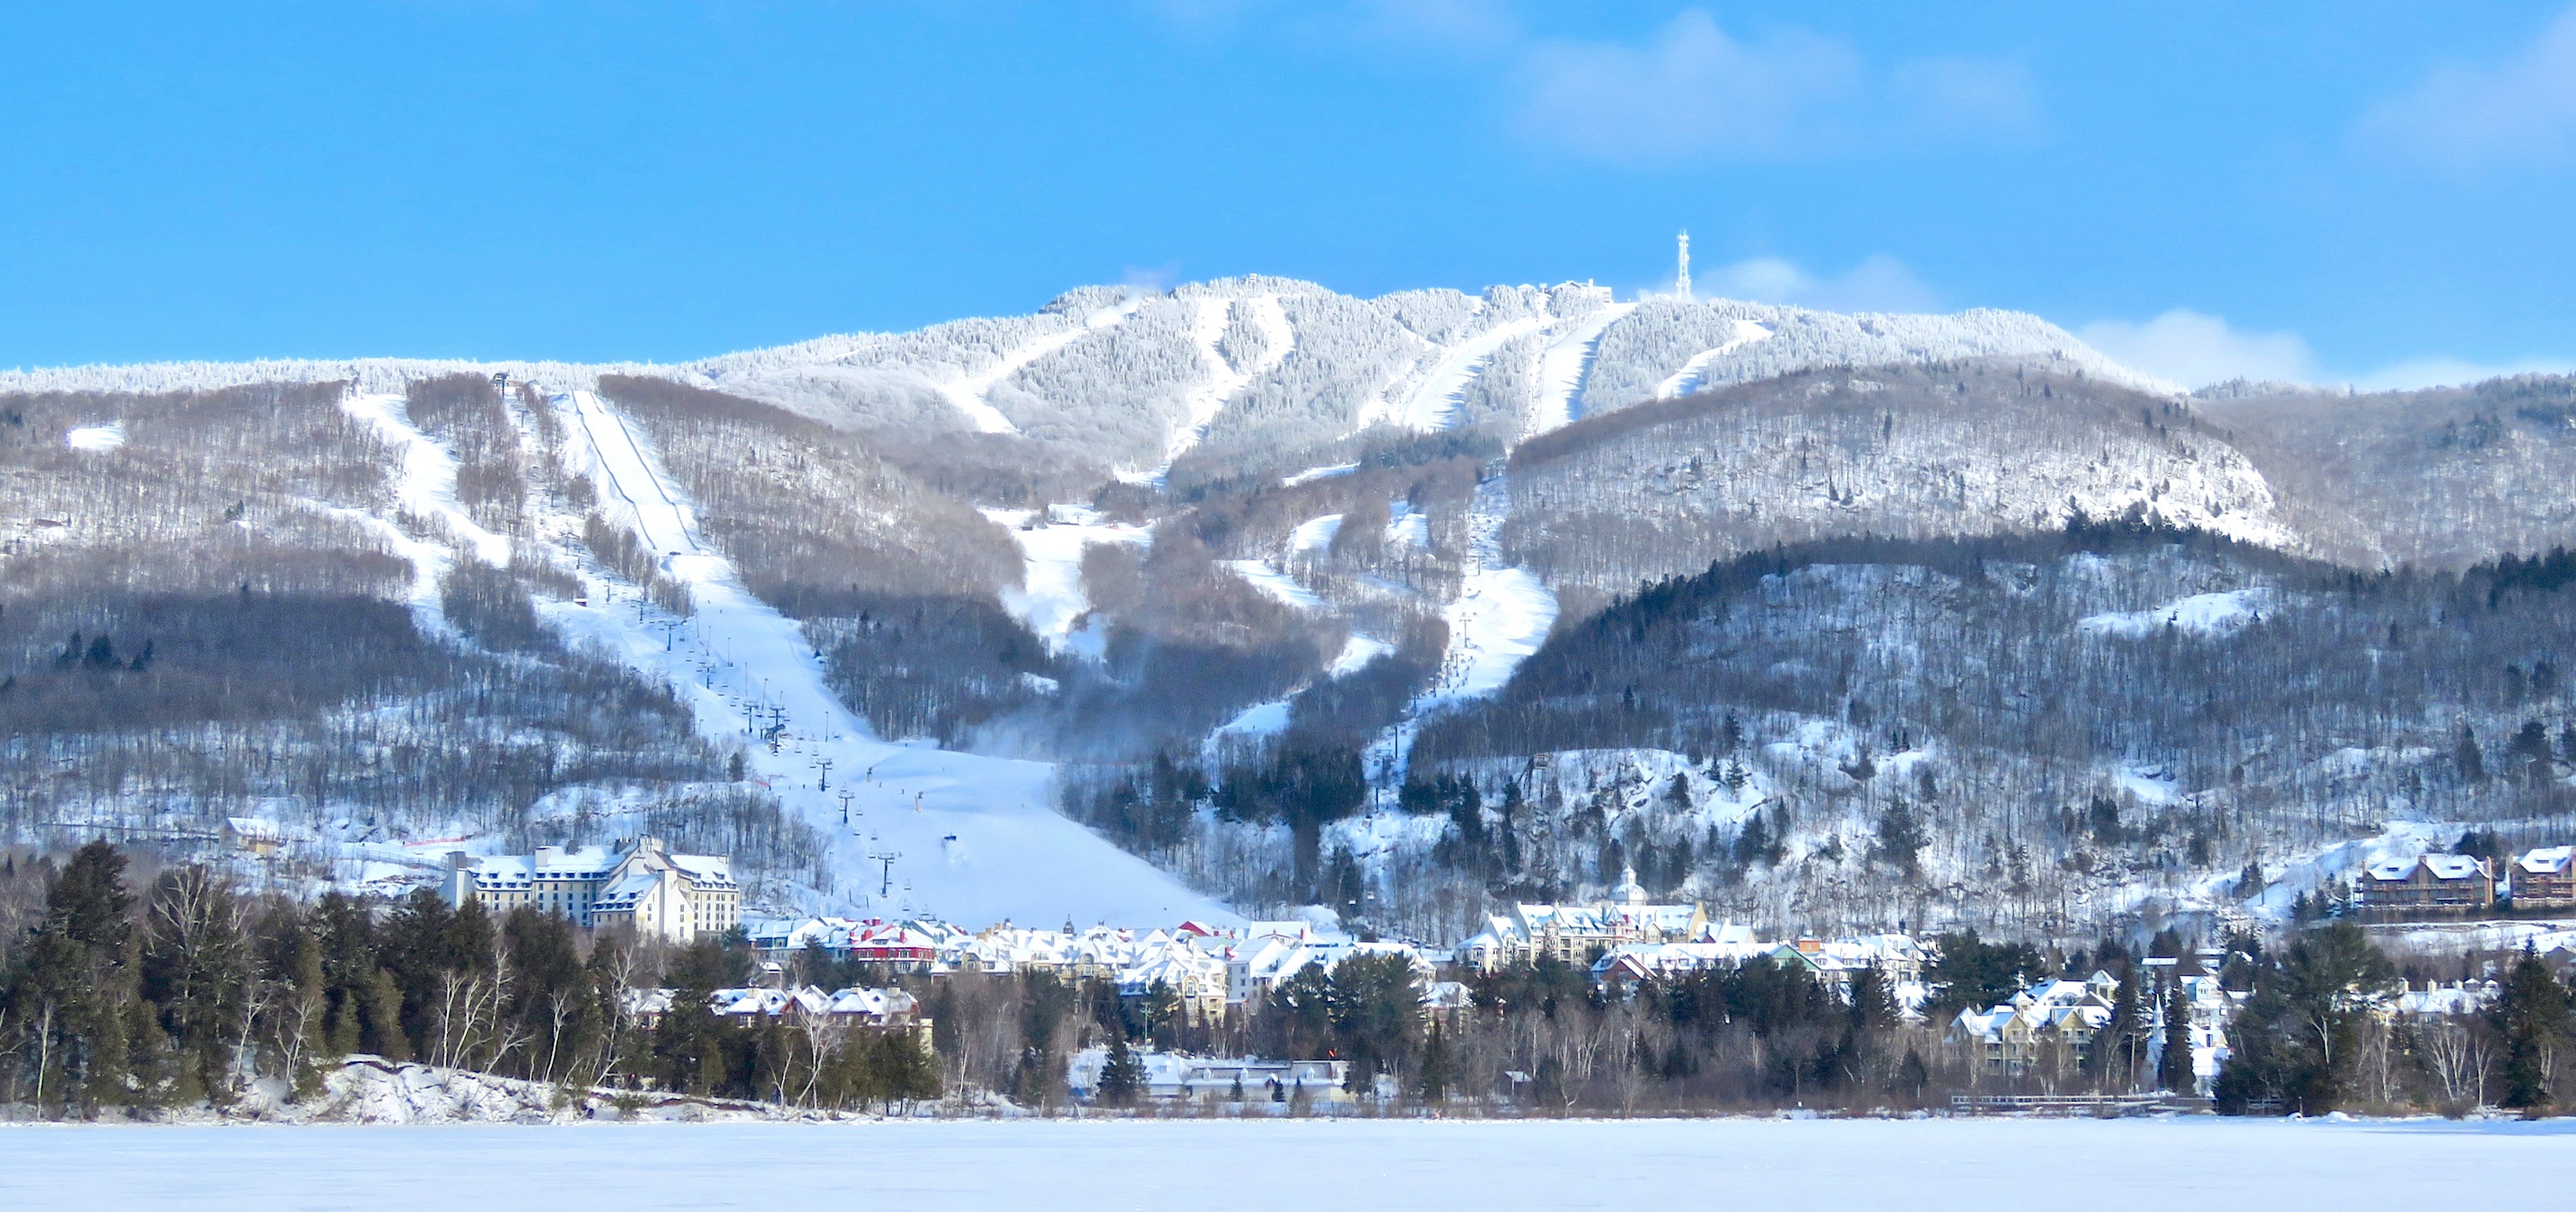 www.Tremblant360 photo. All rights reserved.